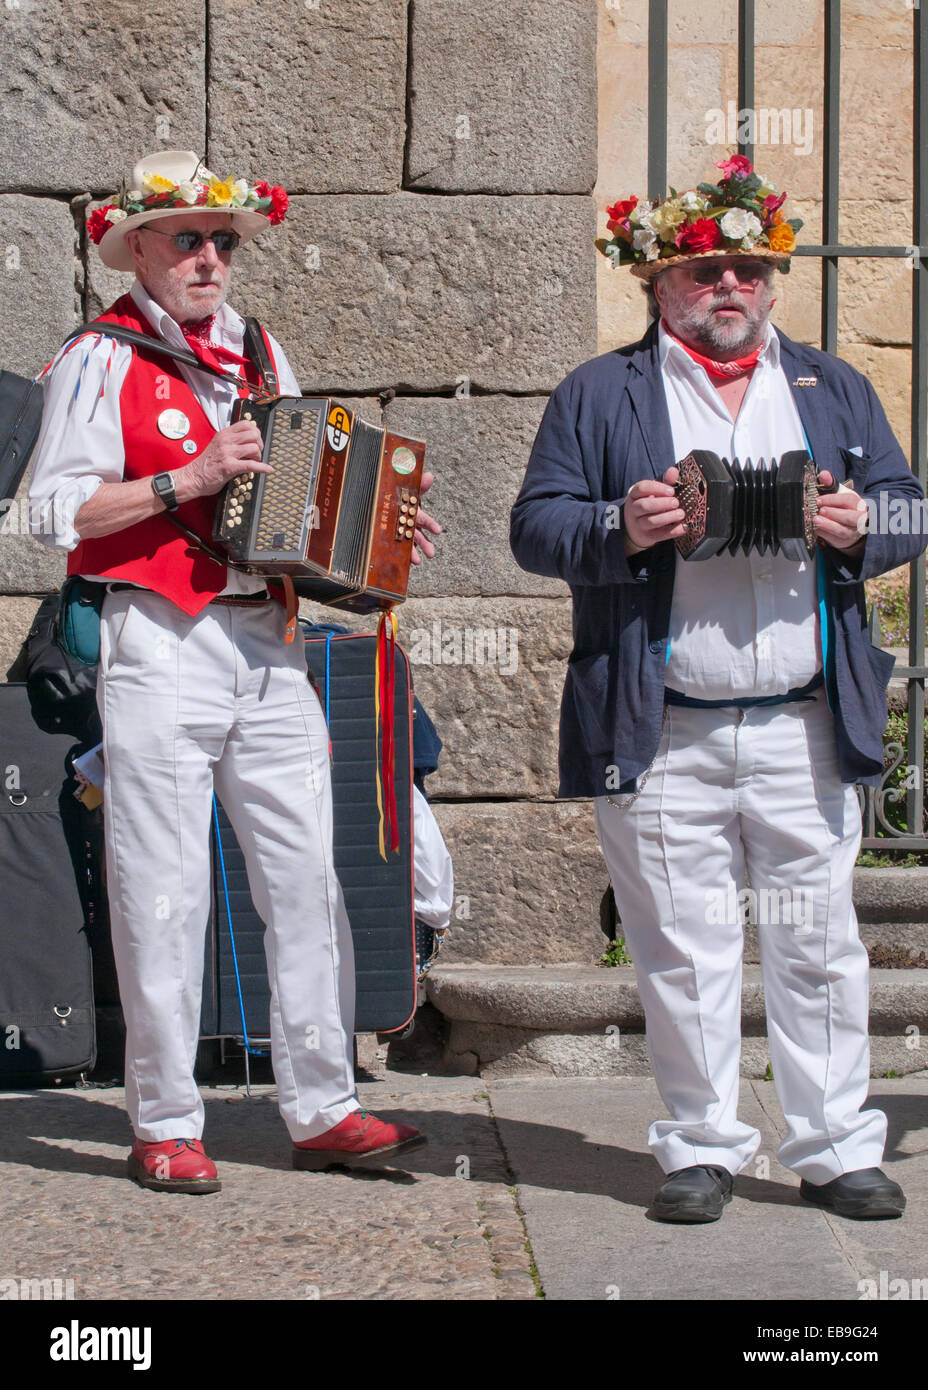 SEGOVIA  SPAIN - MARCH 16 2014 - Musicians of the East Suffolk Morris Men  in the ancient Roman city of Segovia, Spain Stock Photo